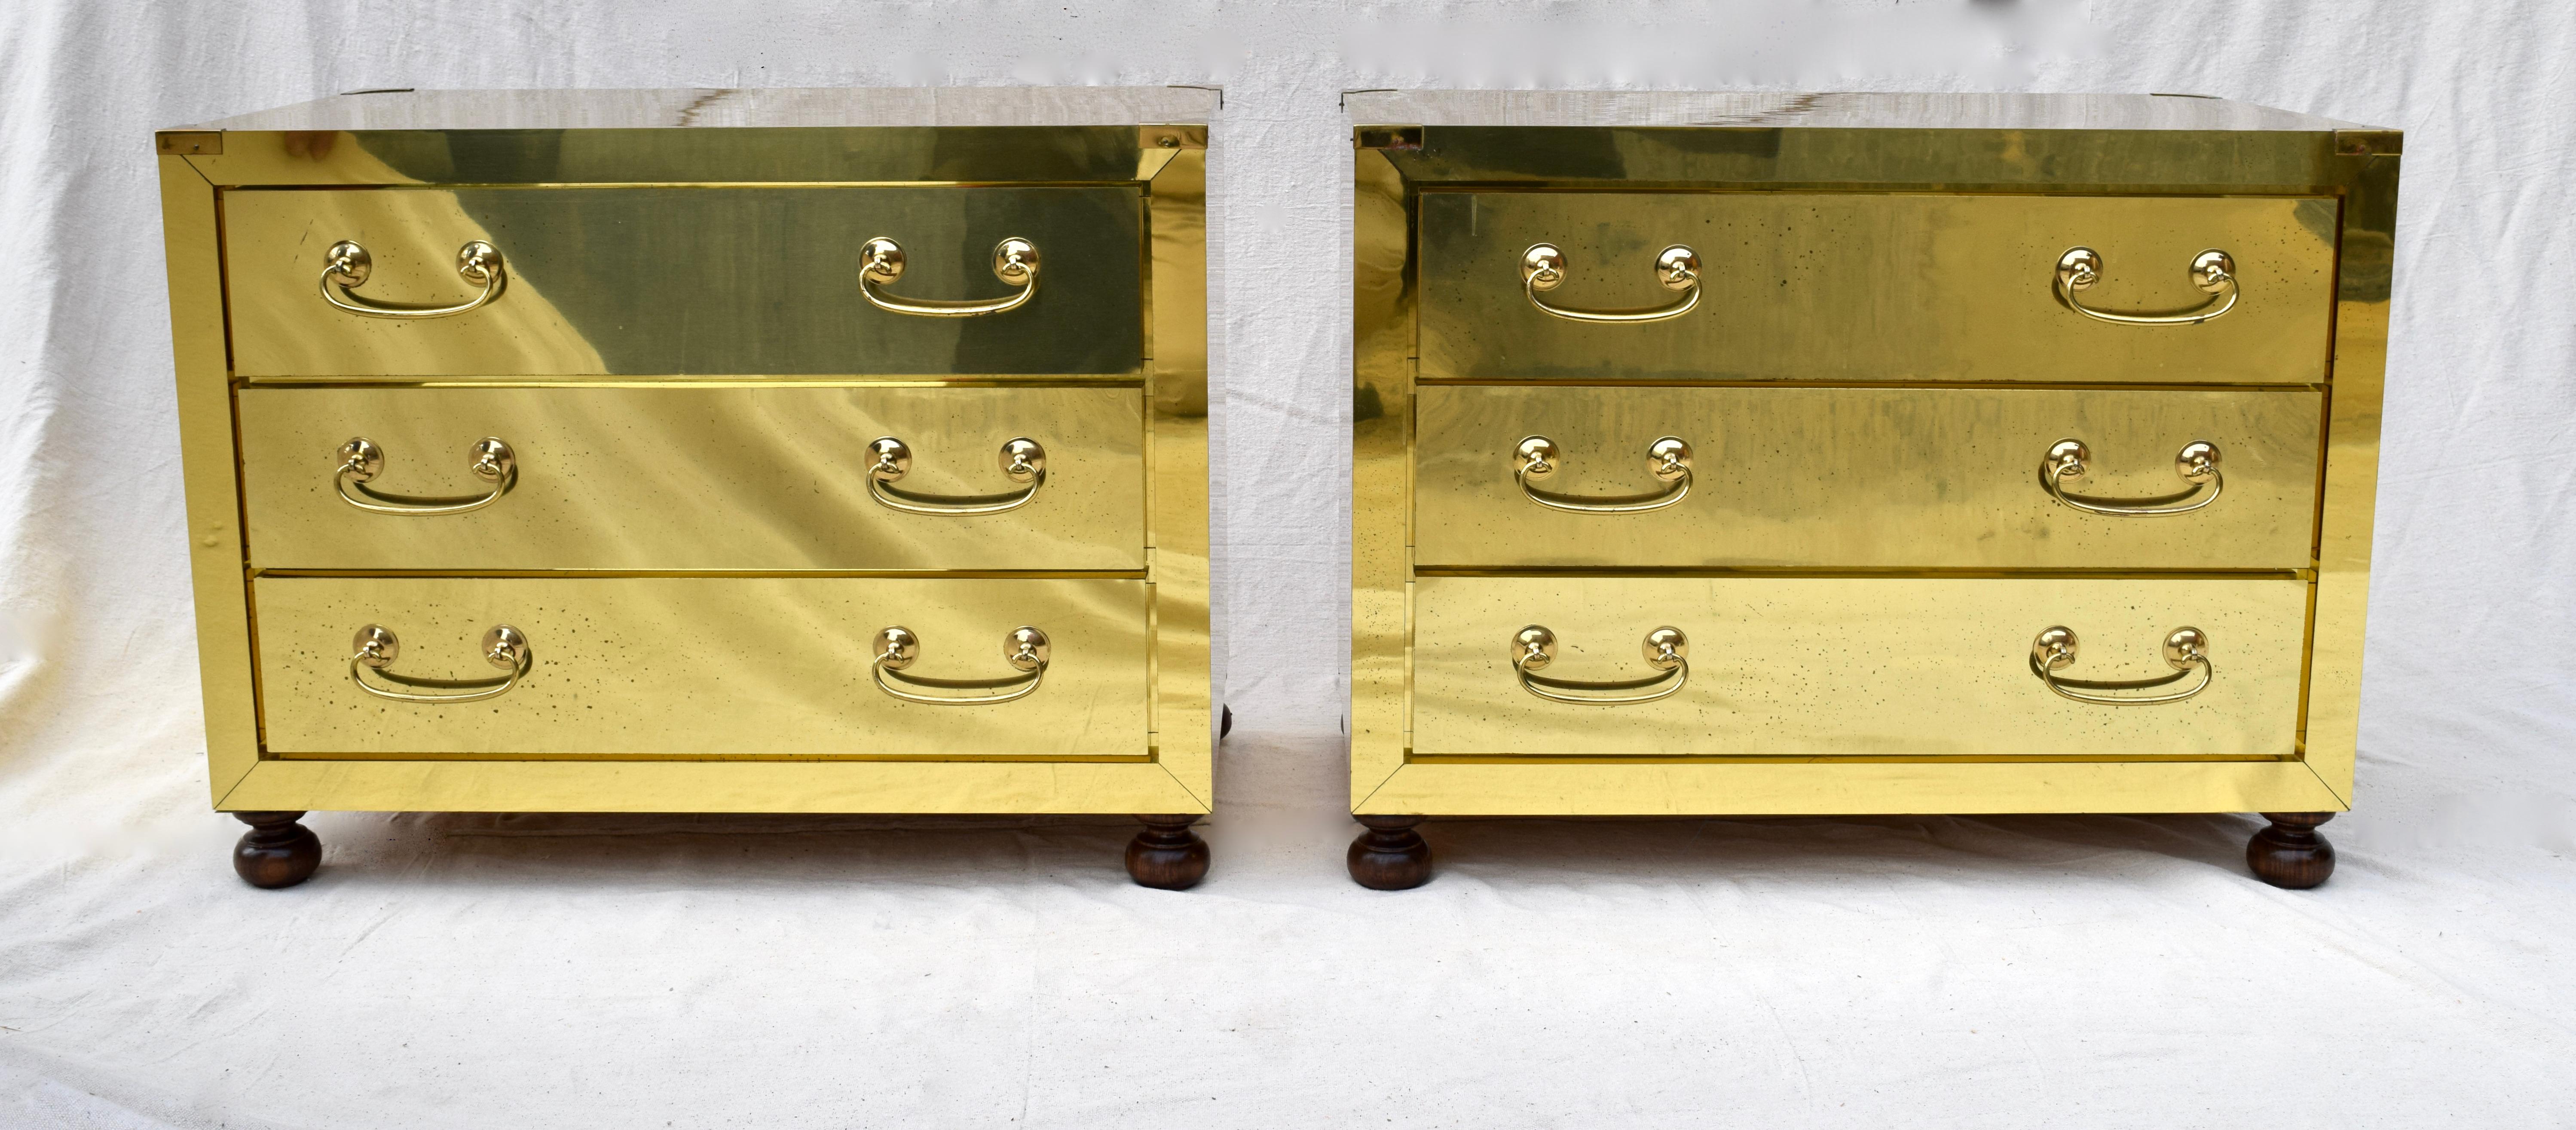 A pair of brass clad three drawer chests with all original finish & walnut canon ball feet.
This marvelous transitional design offers generous storage allowing for versatile placement options.
High quality & very solid.